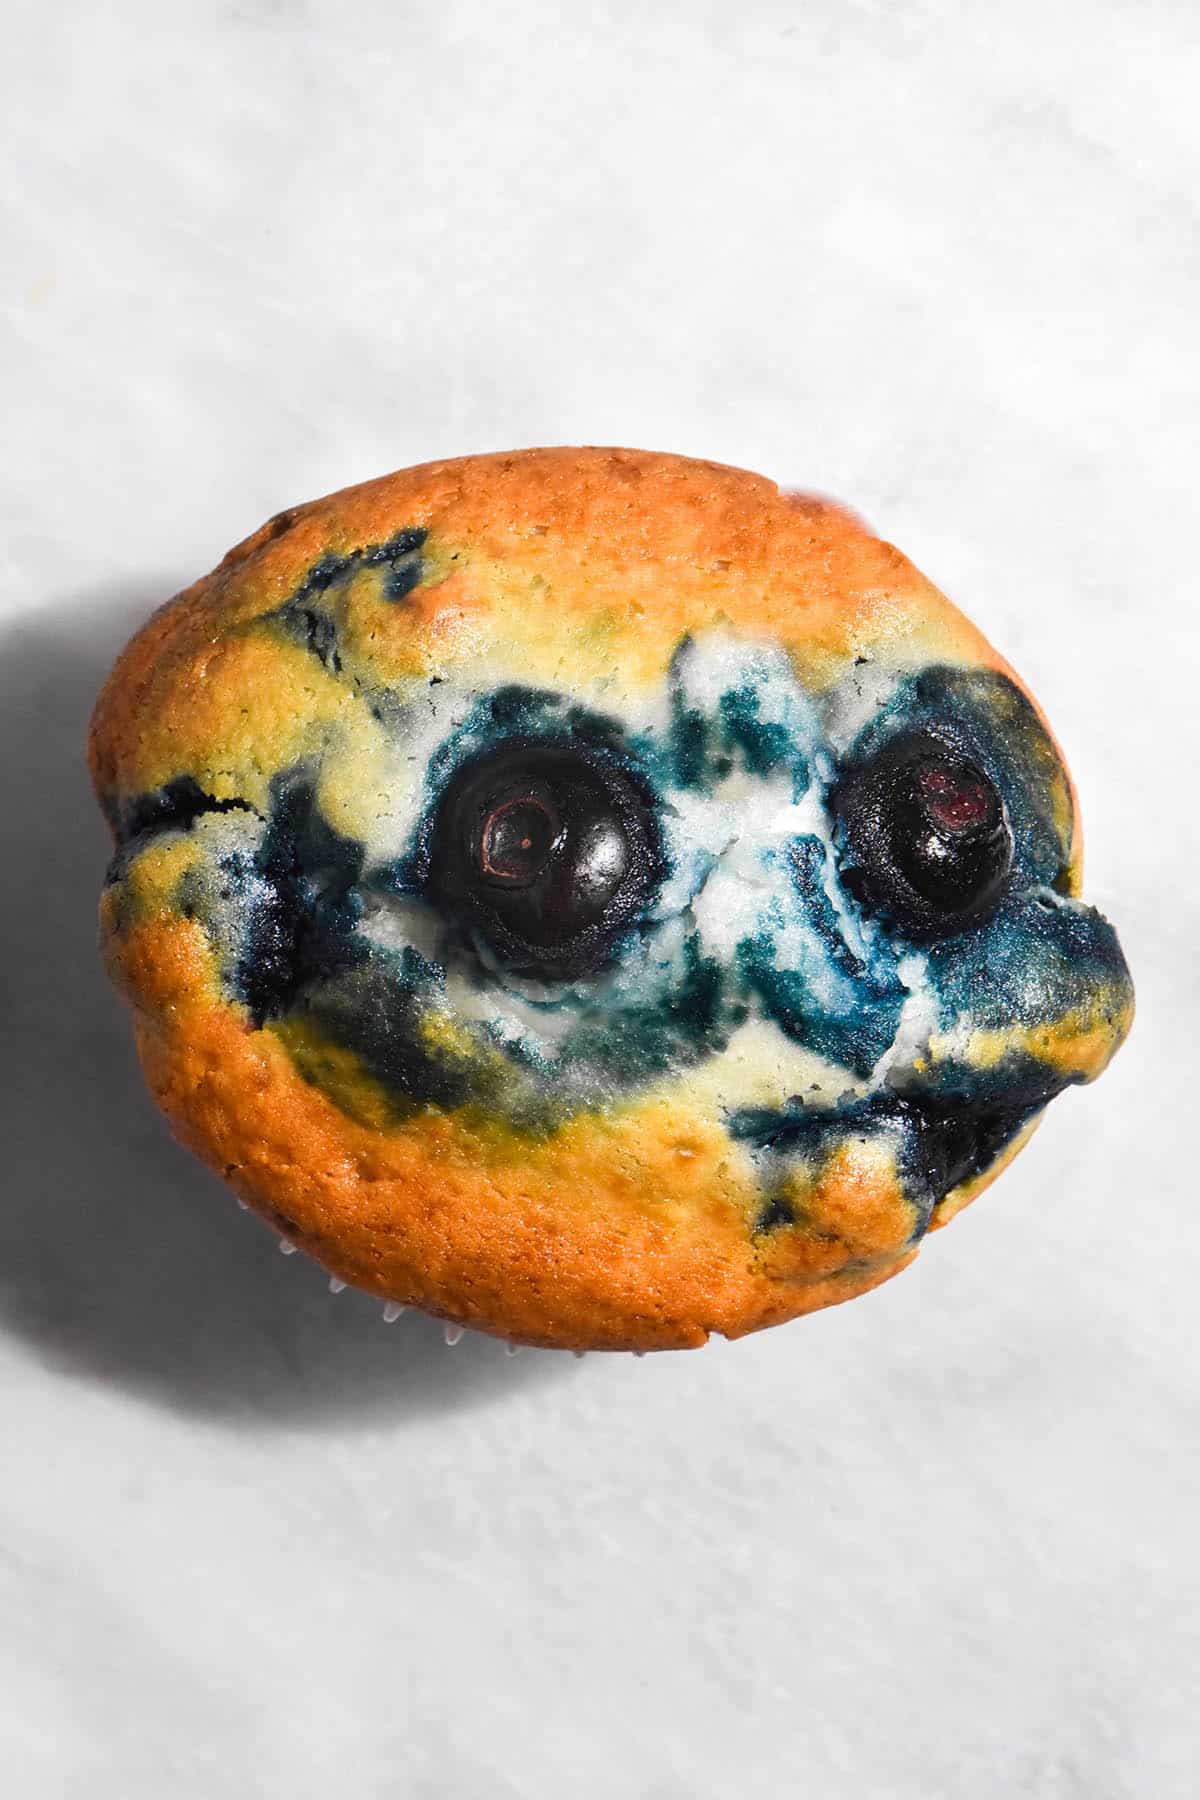 An aerial image of a single serve gluten free vegan blueberry muffin atop a white marble table. The muffin is golden brown and has swirls of blueberry on top. 